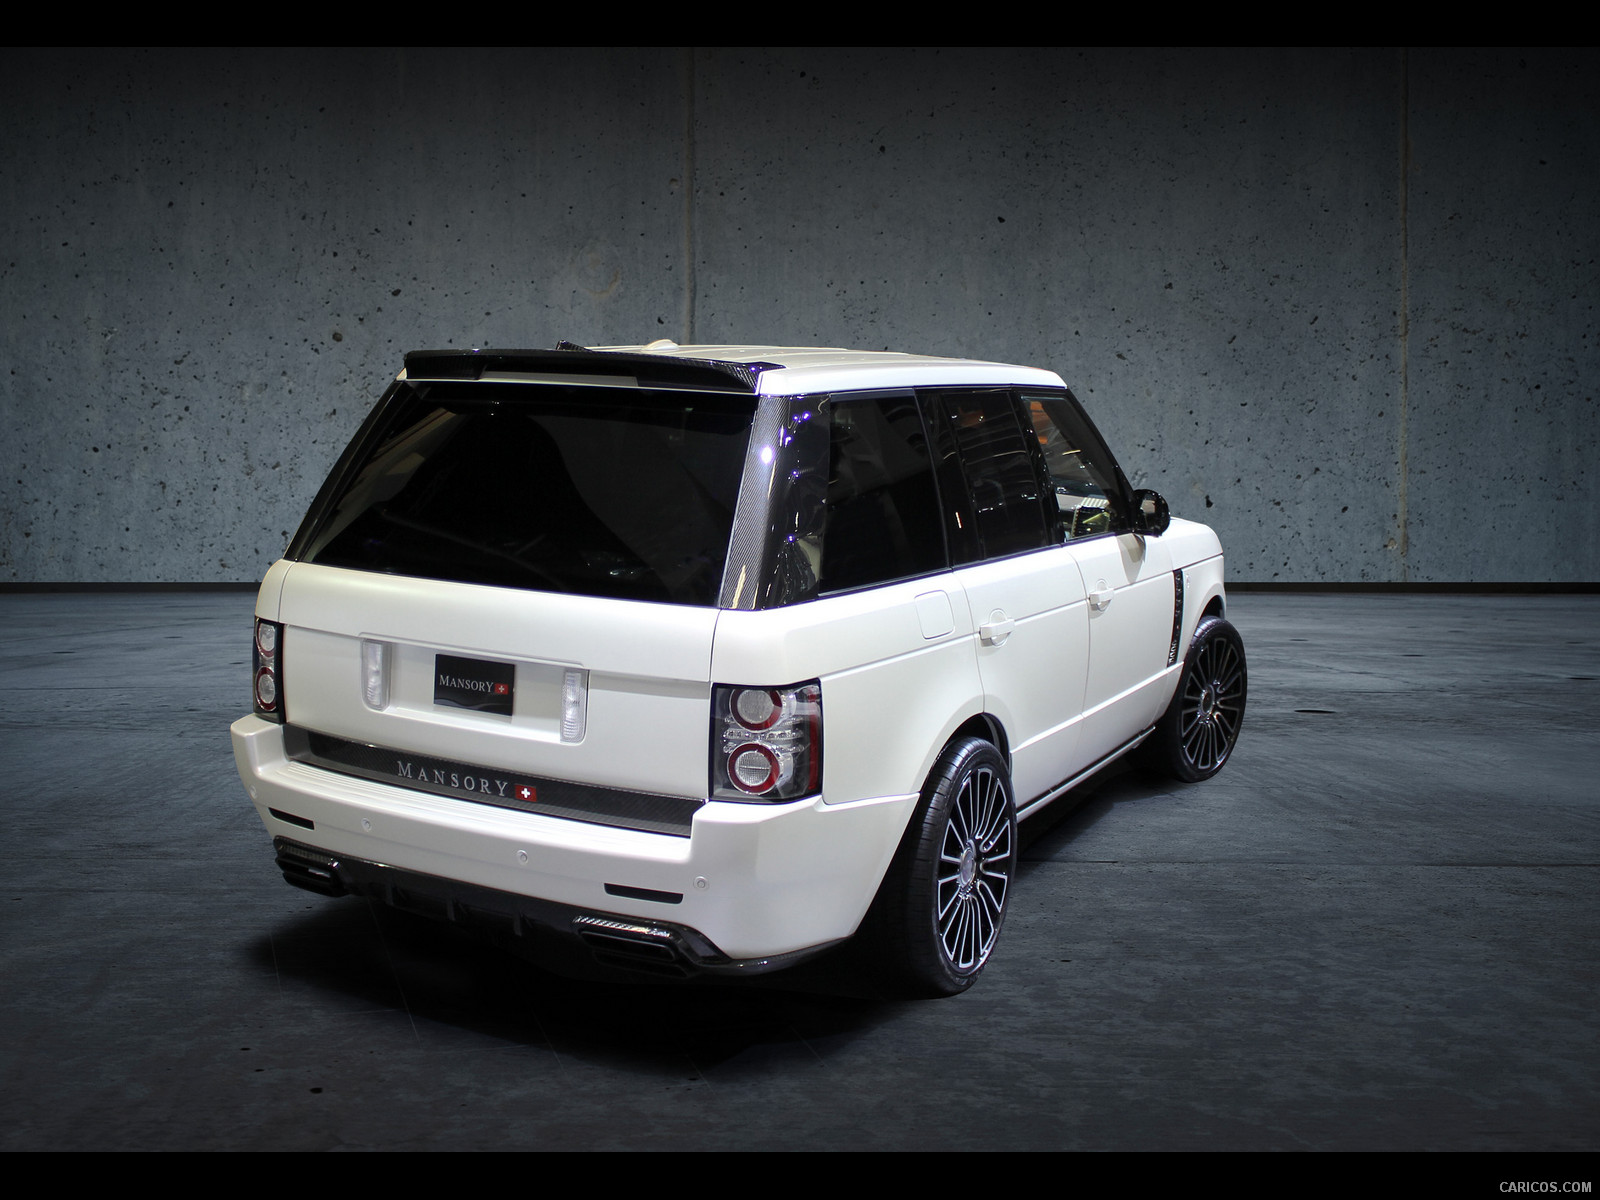 2011 Mansory Range Rover Vogue  - Rear, #2 of 4